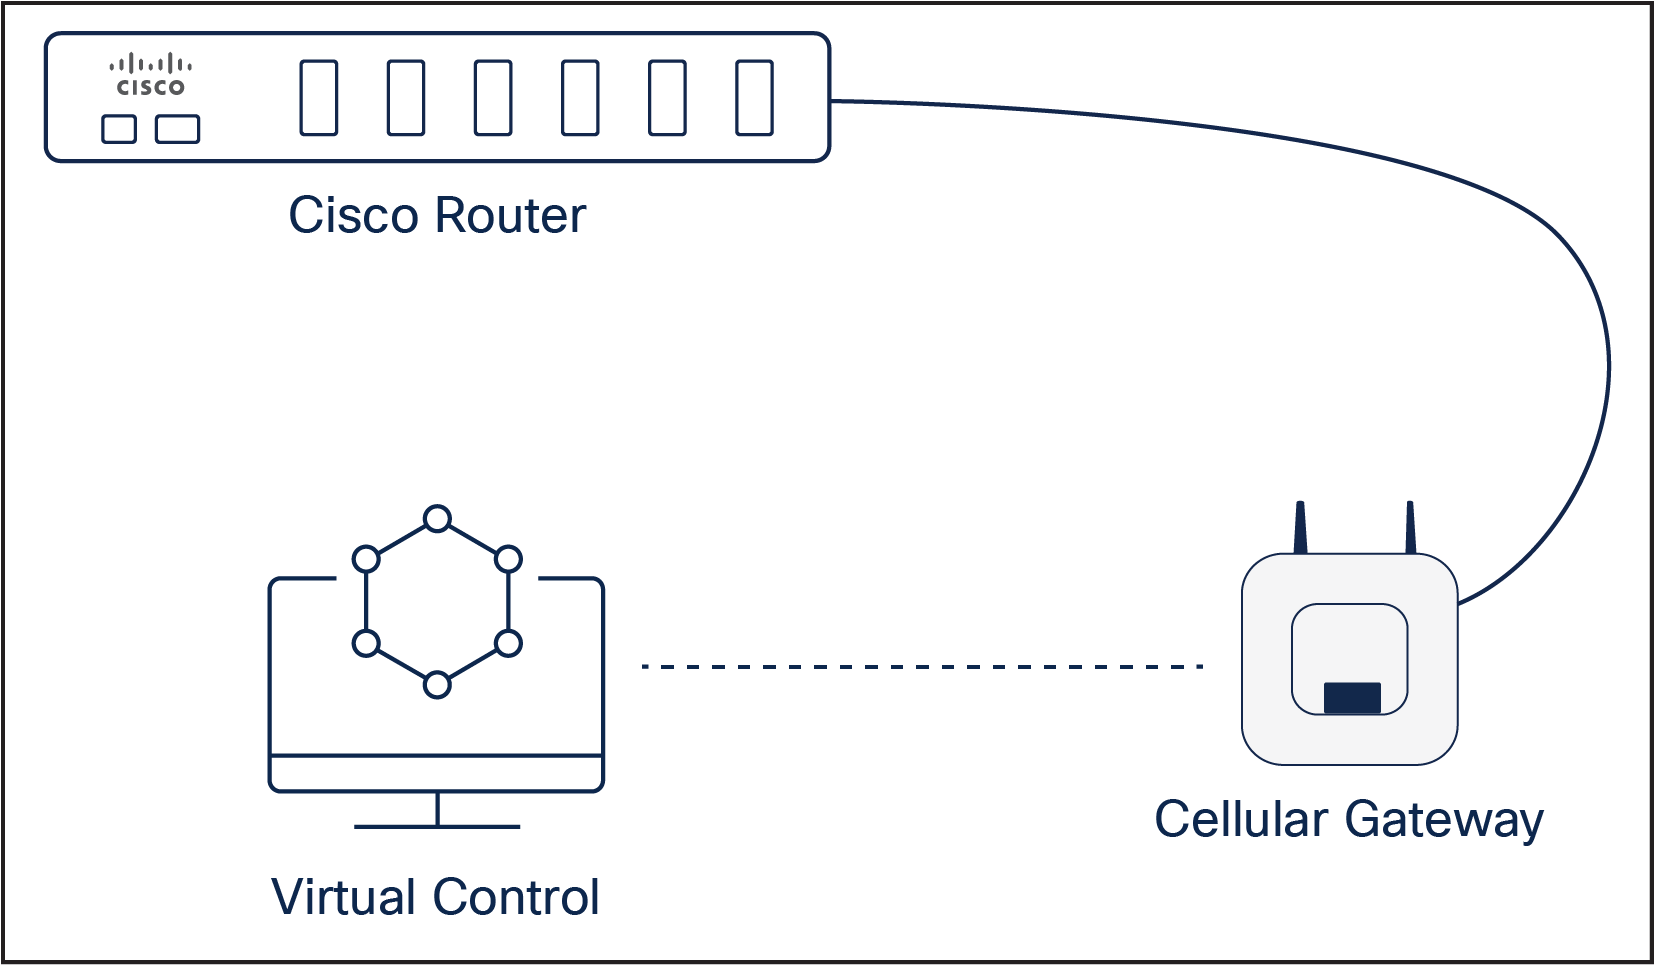 Cellular Gateways/Routers - Industrial Network Infrastructure